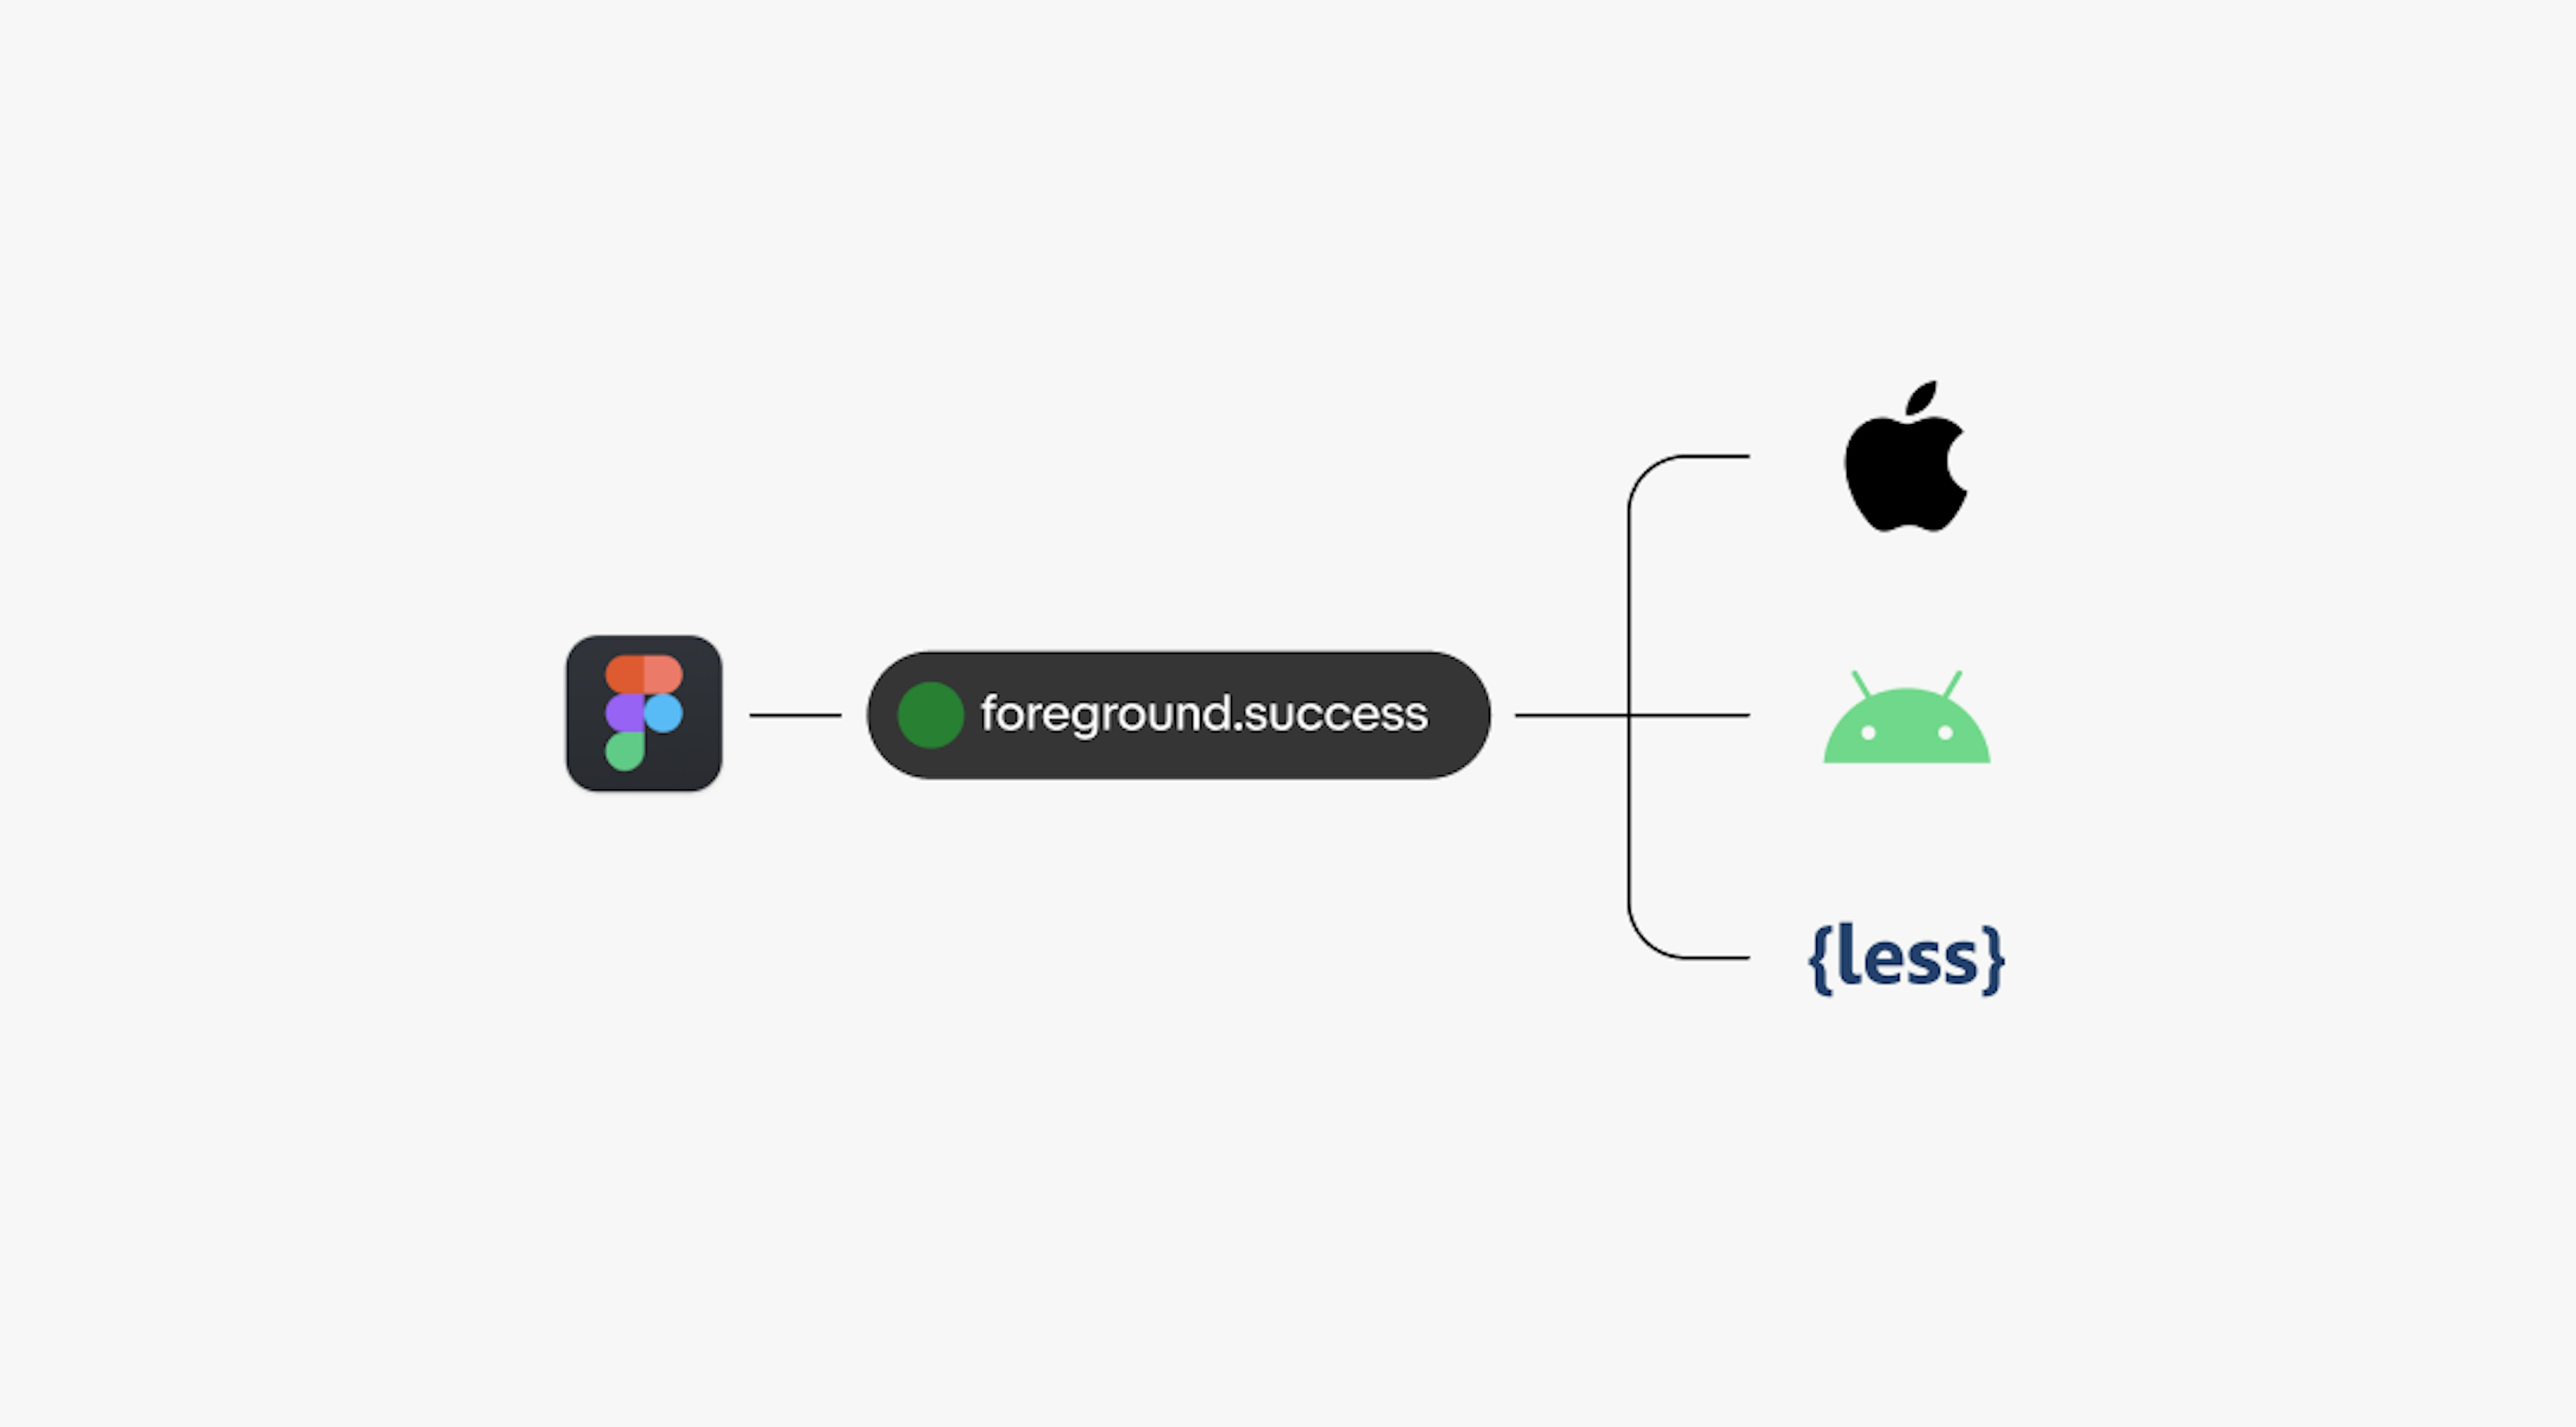 A visual hierarchy graphic. From left to right Figma points to a pill shape with the token “foreground.success” in it. The pill points and branches out to 3 items. From top to bottom is IOS, Android, and {less}.